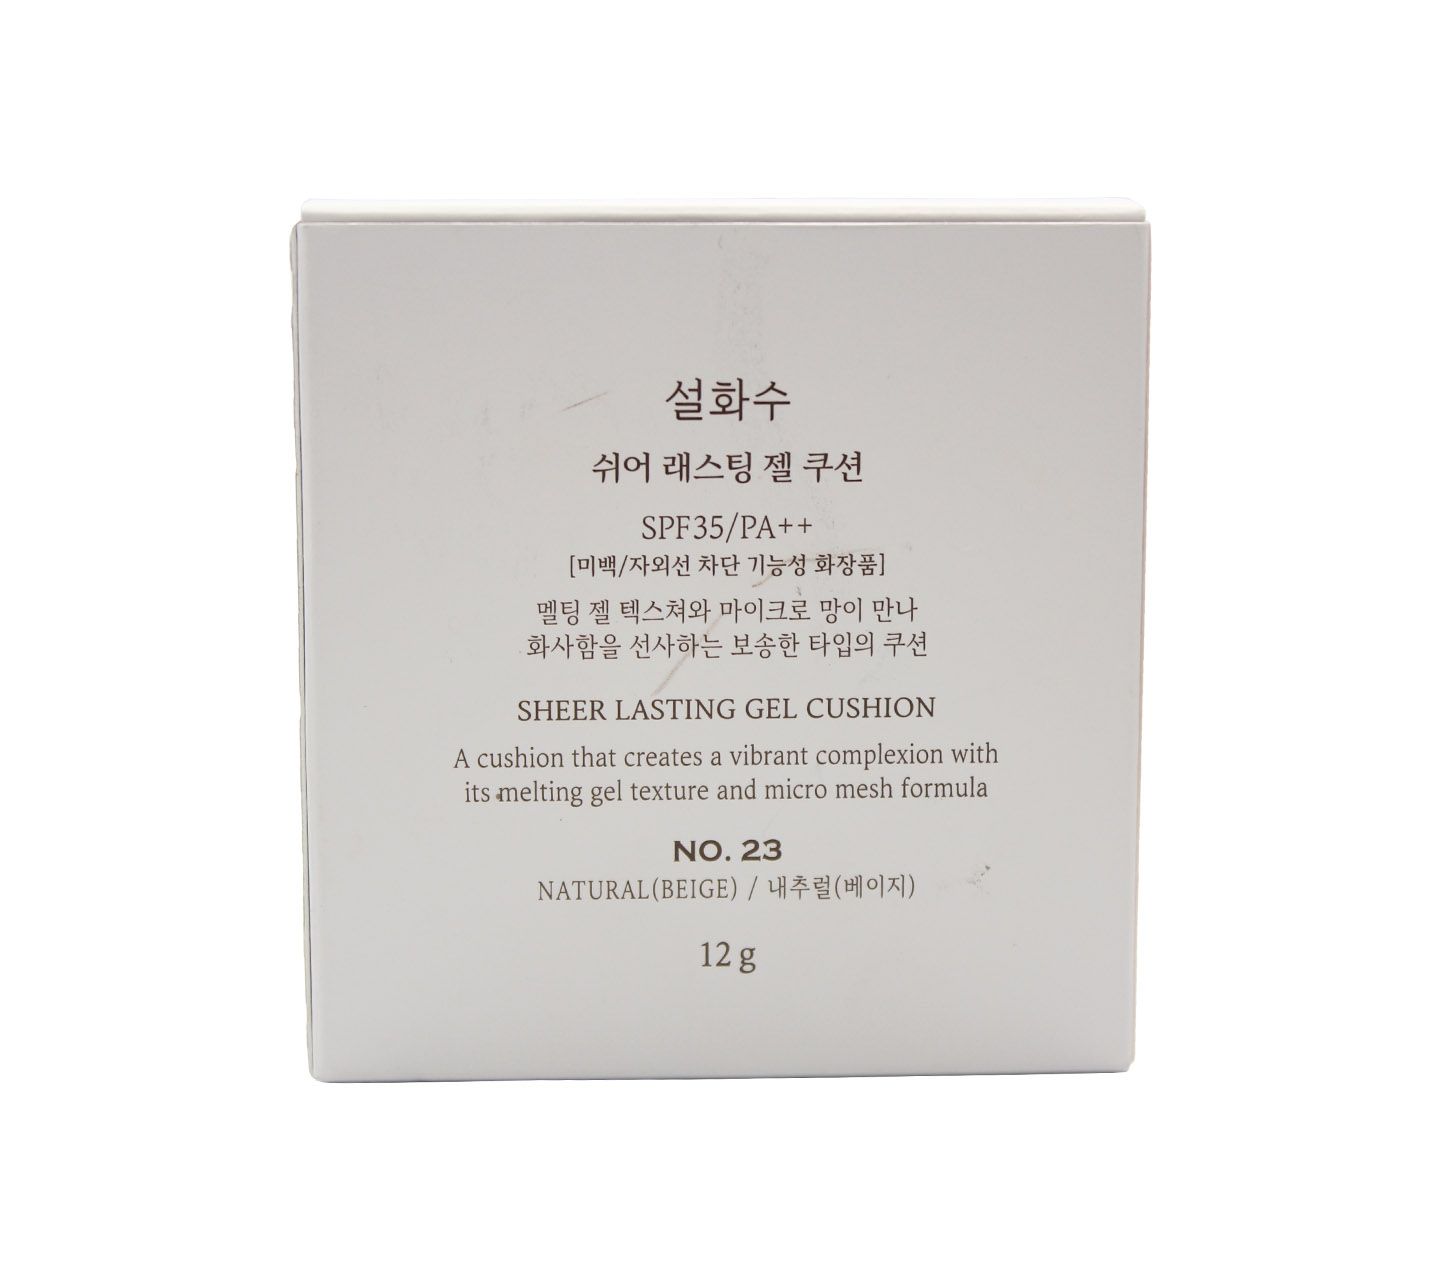 Sulwhasoo Sheer Lasting Gel Cushion No.23 Natural (Beige) Faces